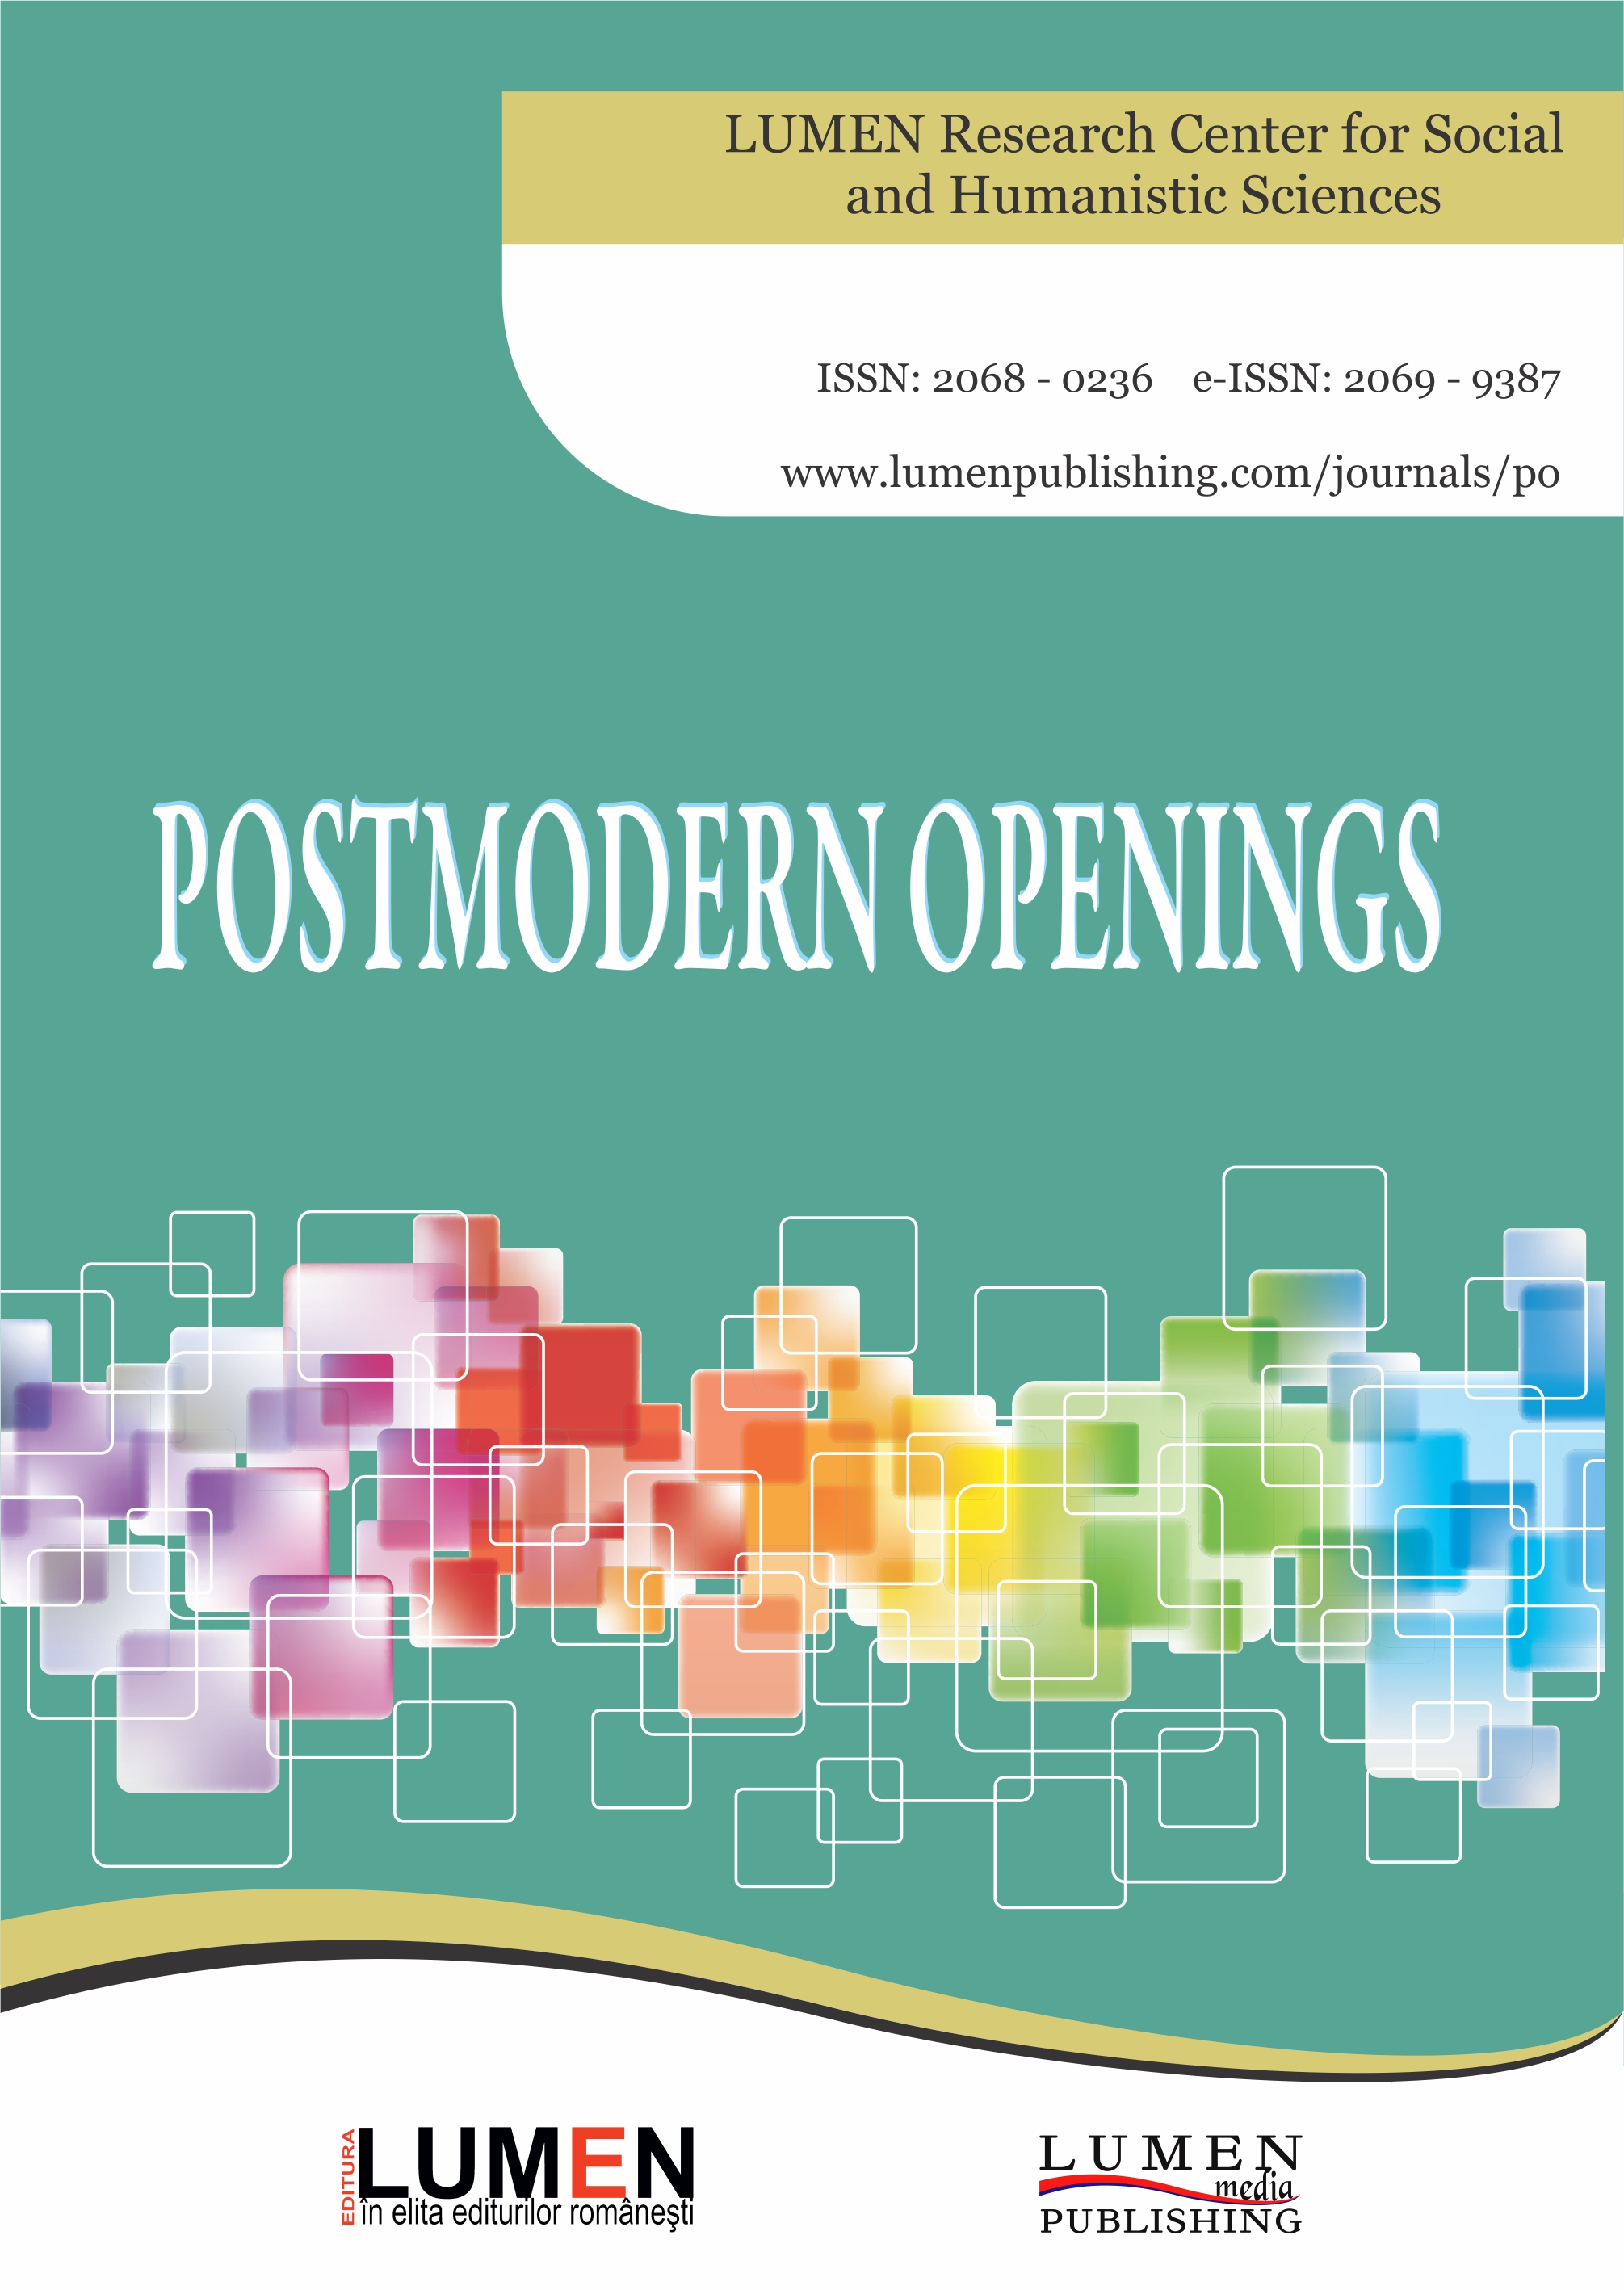 The Organization of a Foreign Language Distance Learning in Quarantine During the Postmodern Era